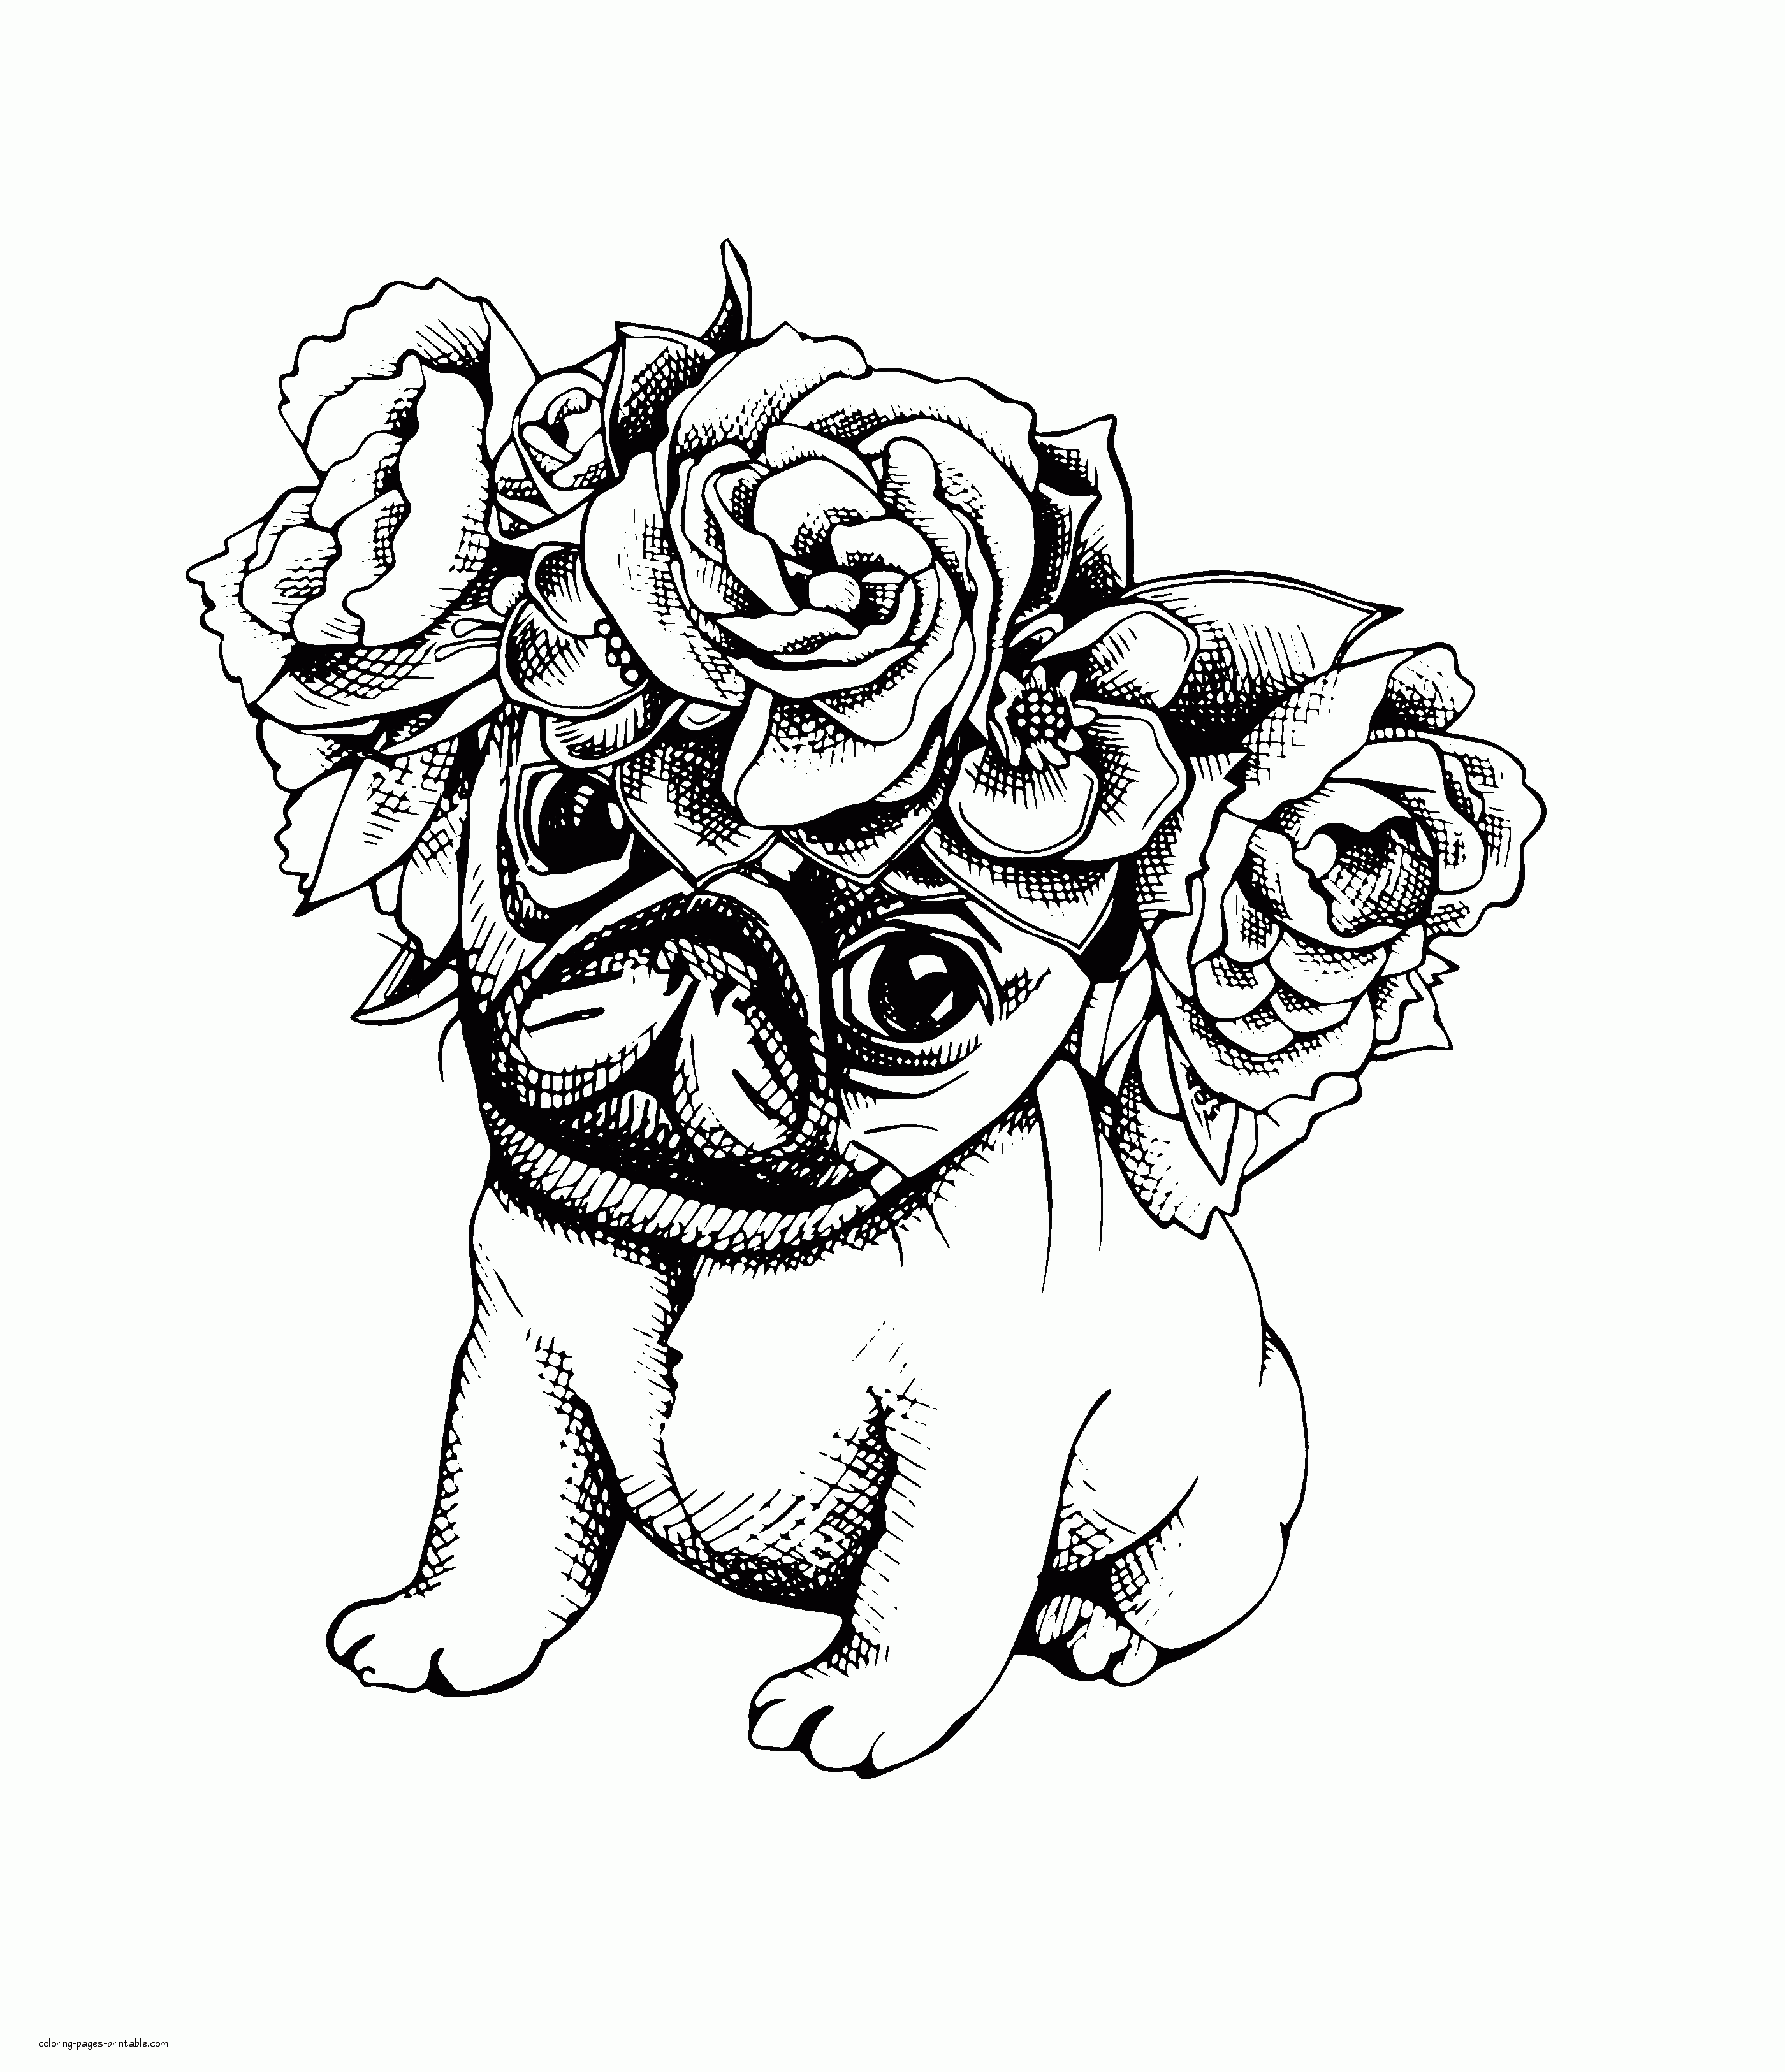 Download Animal Coloring Pages For Adults. Puppy || COLORING-PAGES-PRINTABLE.COM